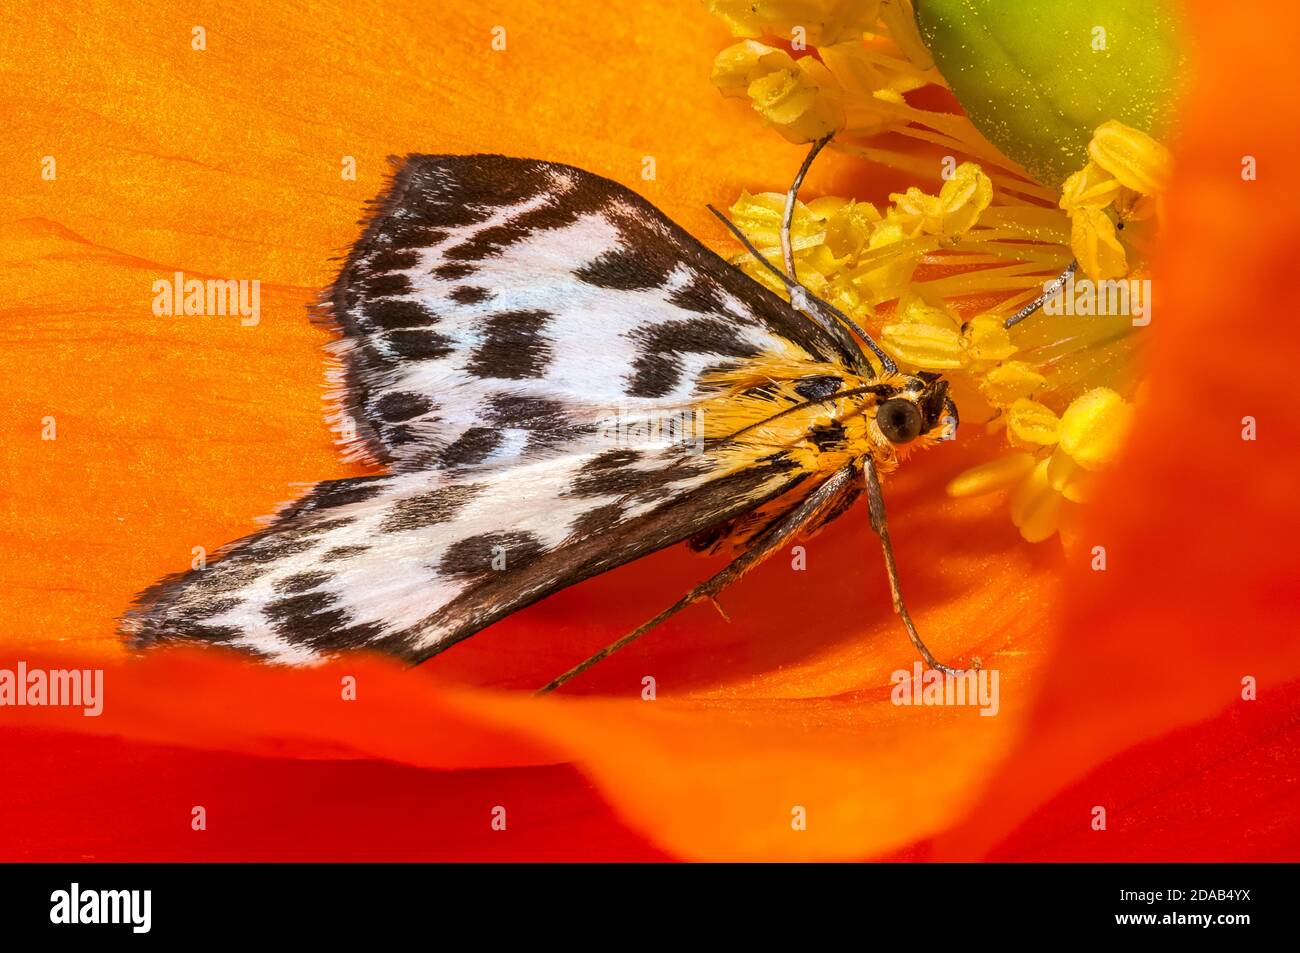 An adult small magpie moth (Eurrhypara hortulata) at rest on the orange bloom of a Californian poppy (Eschscholzia californica)  flower in a garden in Stock Photo